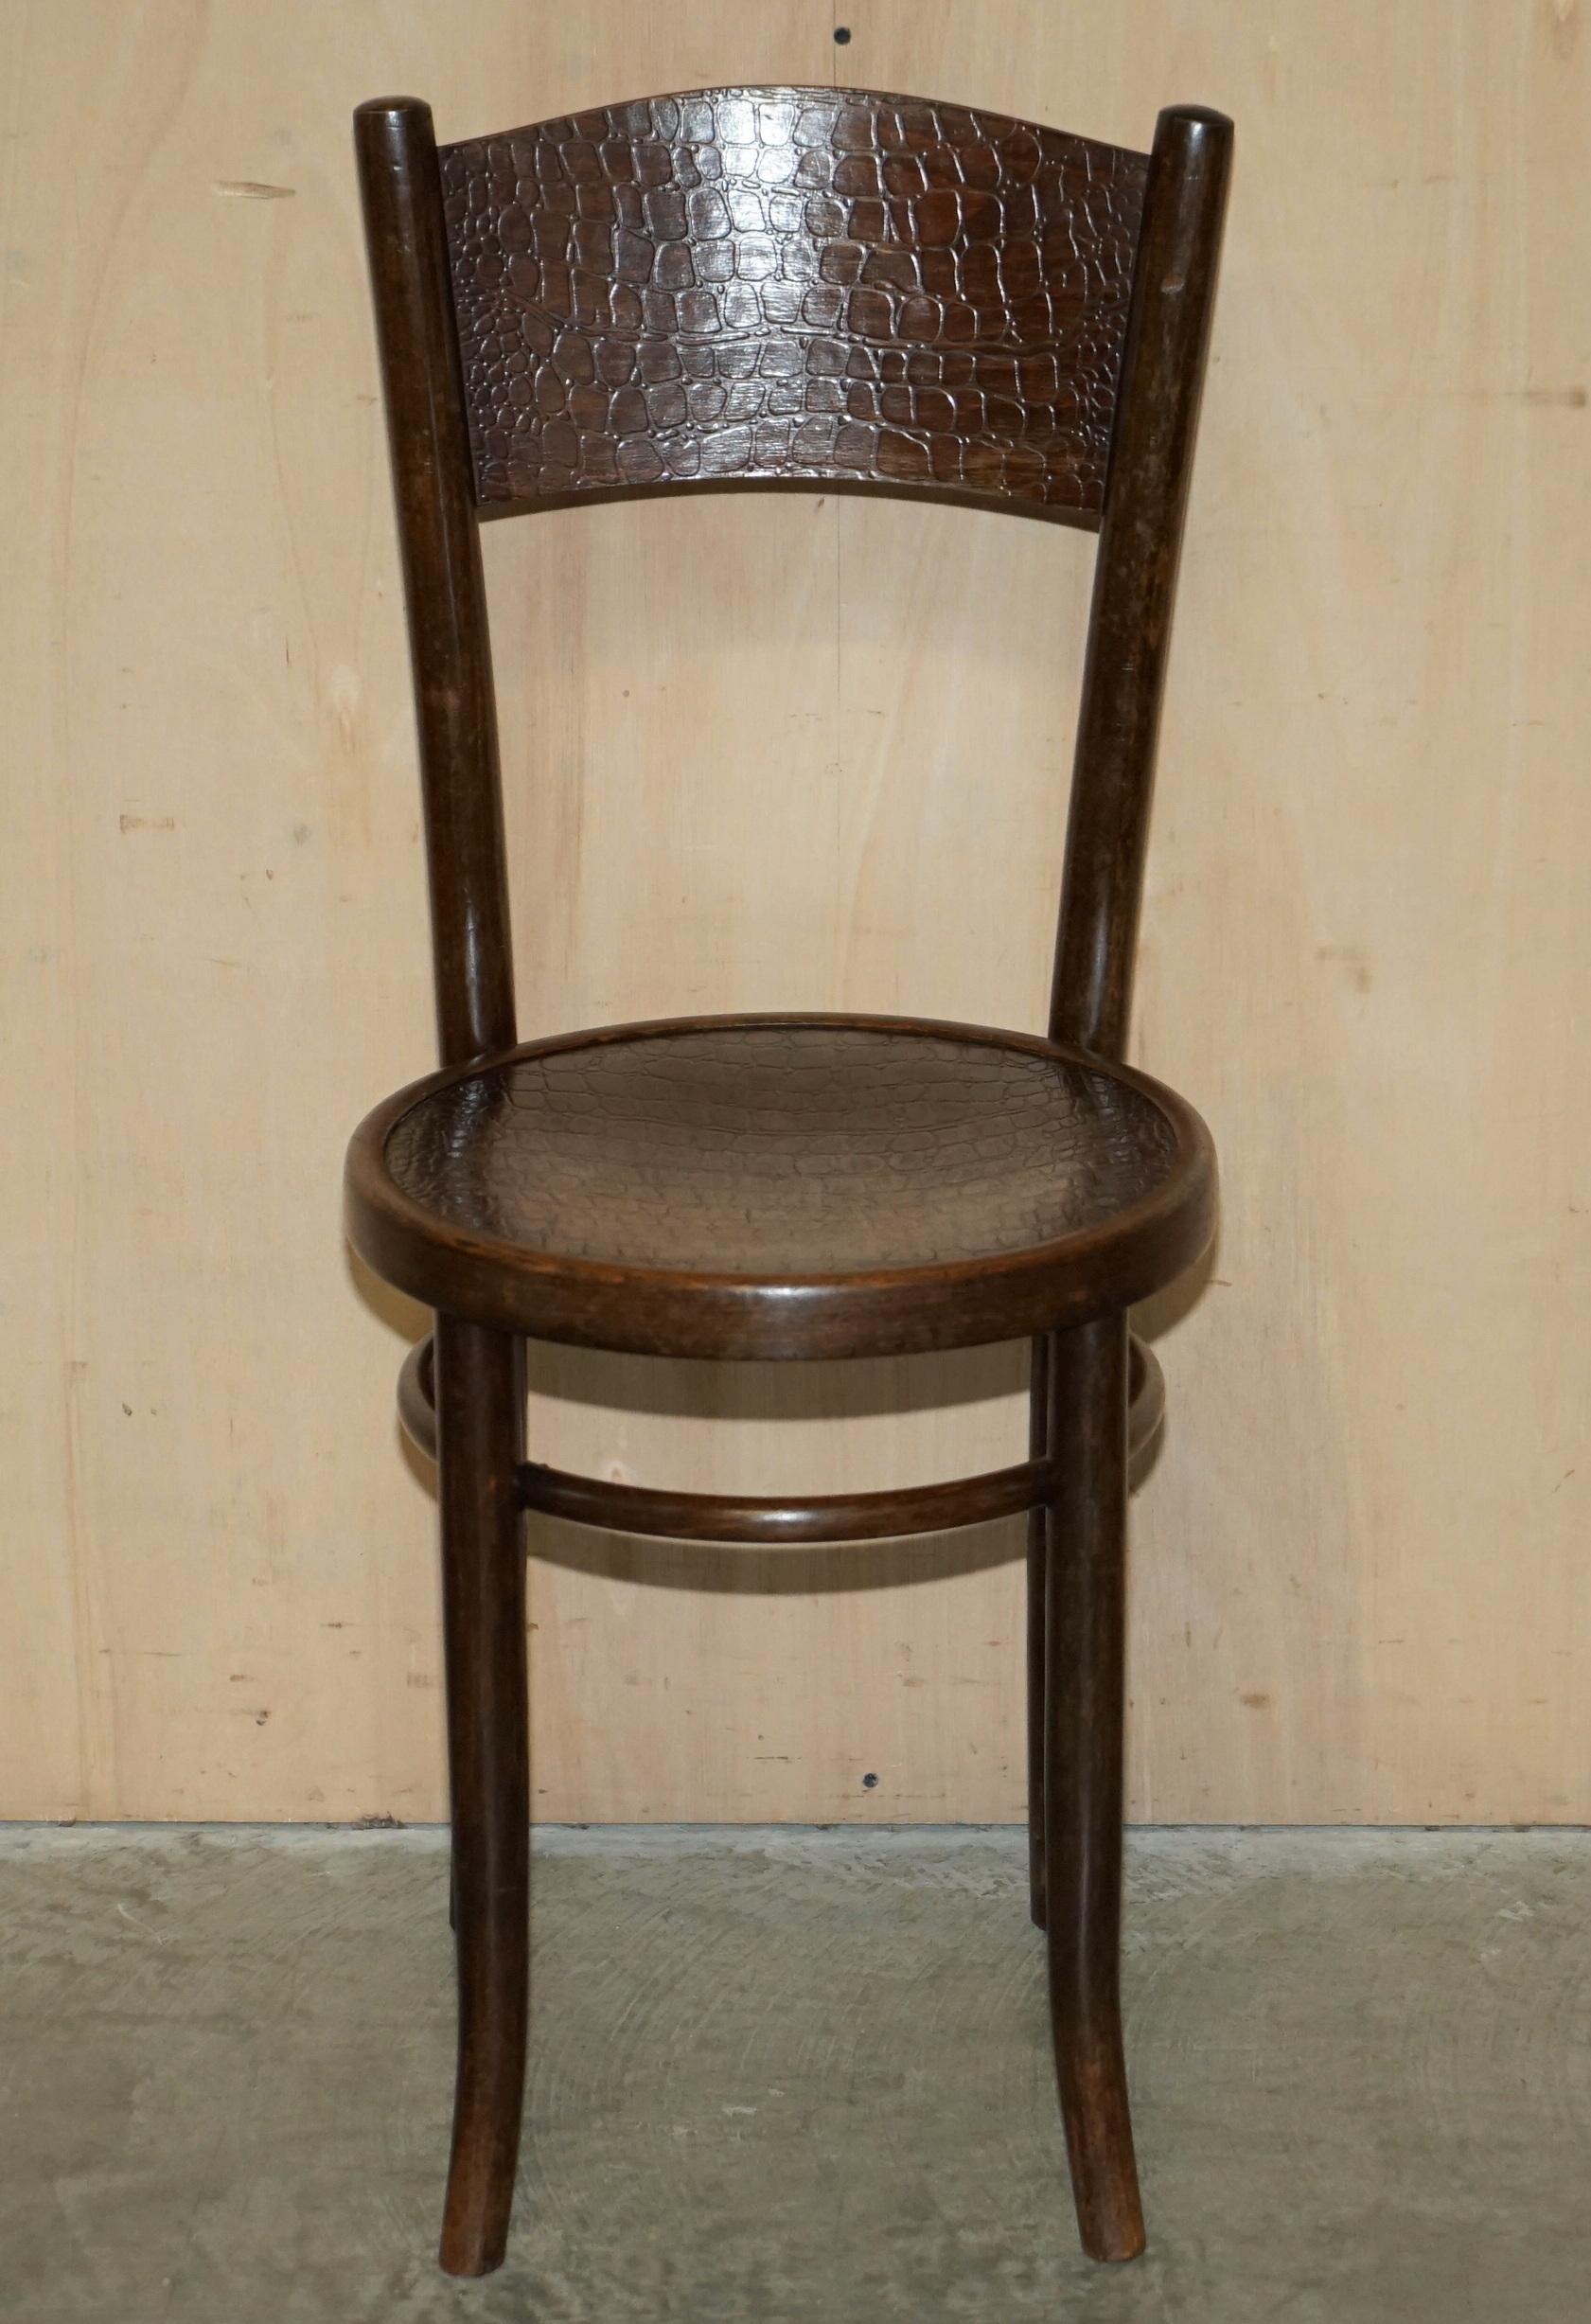 We are delighted to offer for sale this original fully stamped Mundus Vienna Austria, bentwood high back chair.

A very good looking well made piece dating to circa 1920. It is bentwood much the same as Thonet and extremely comfortable. A rare